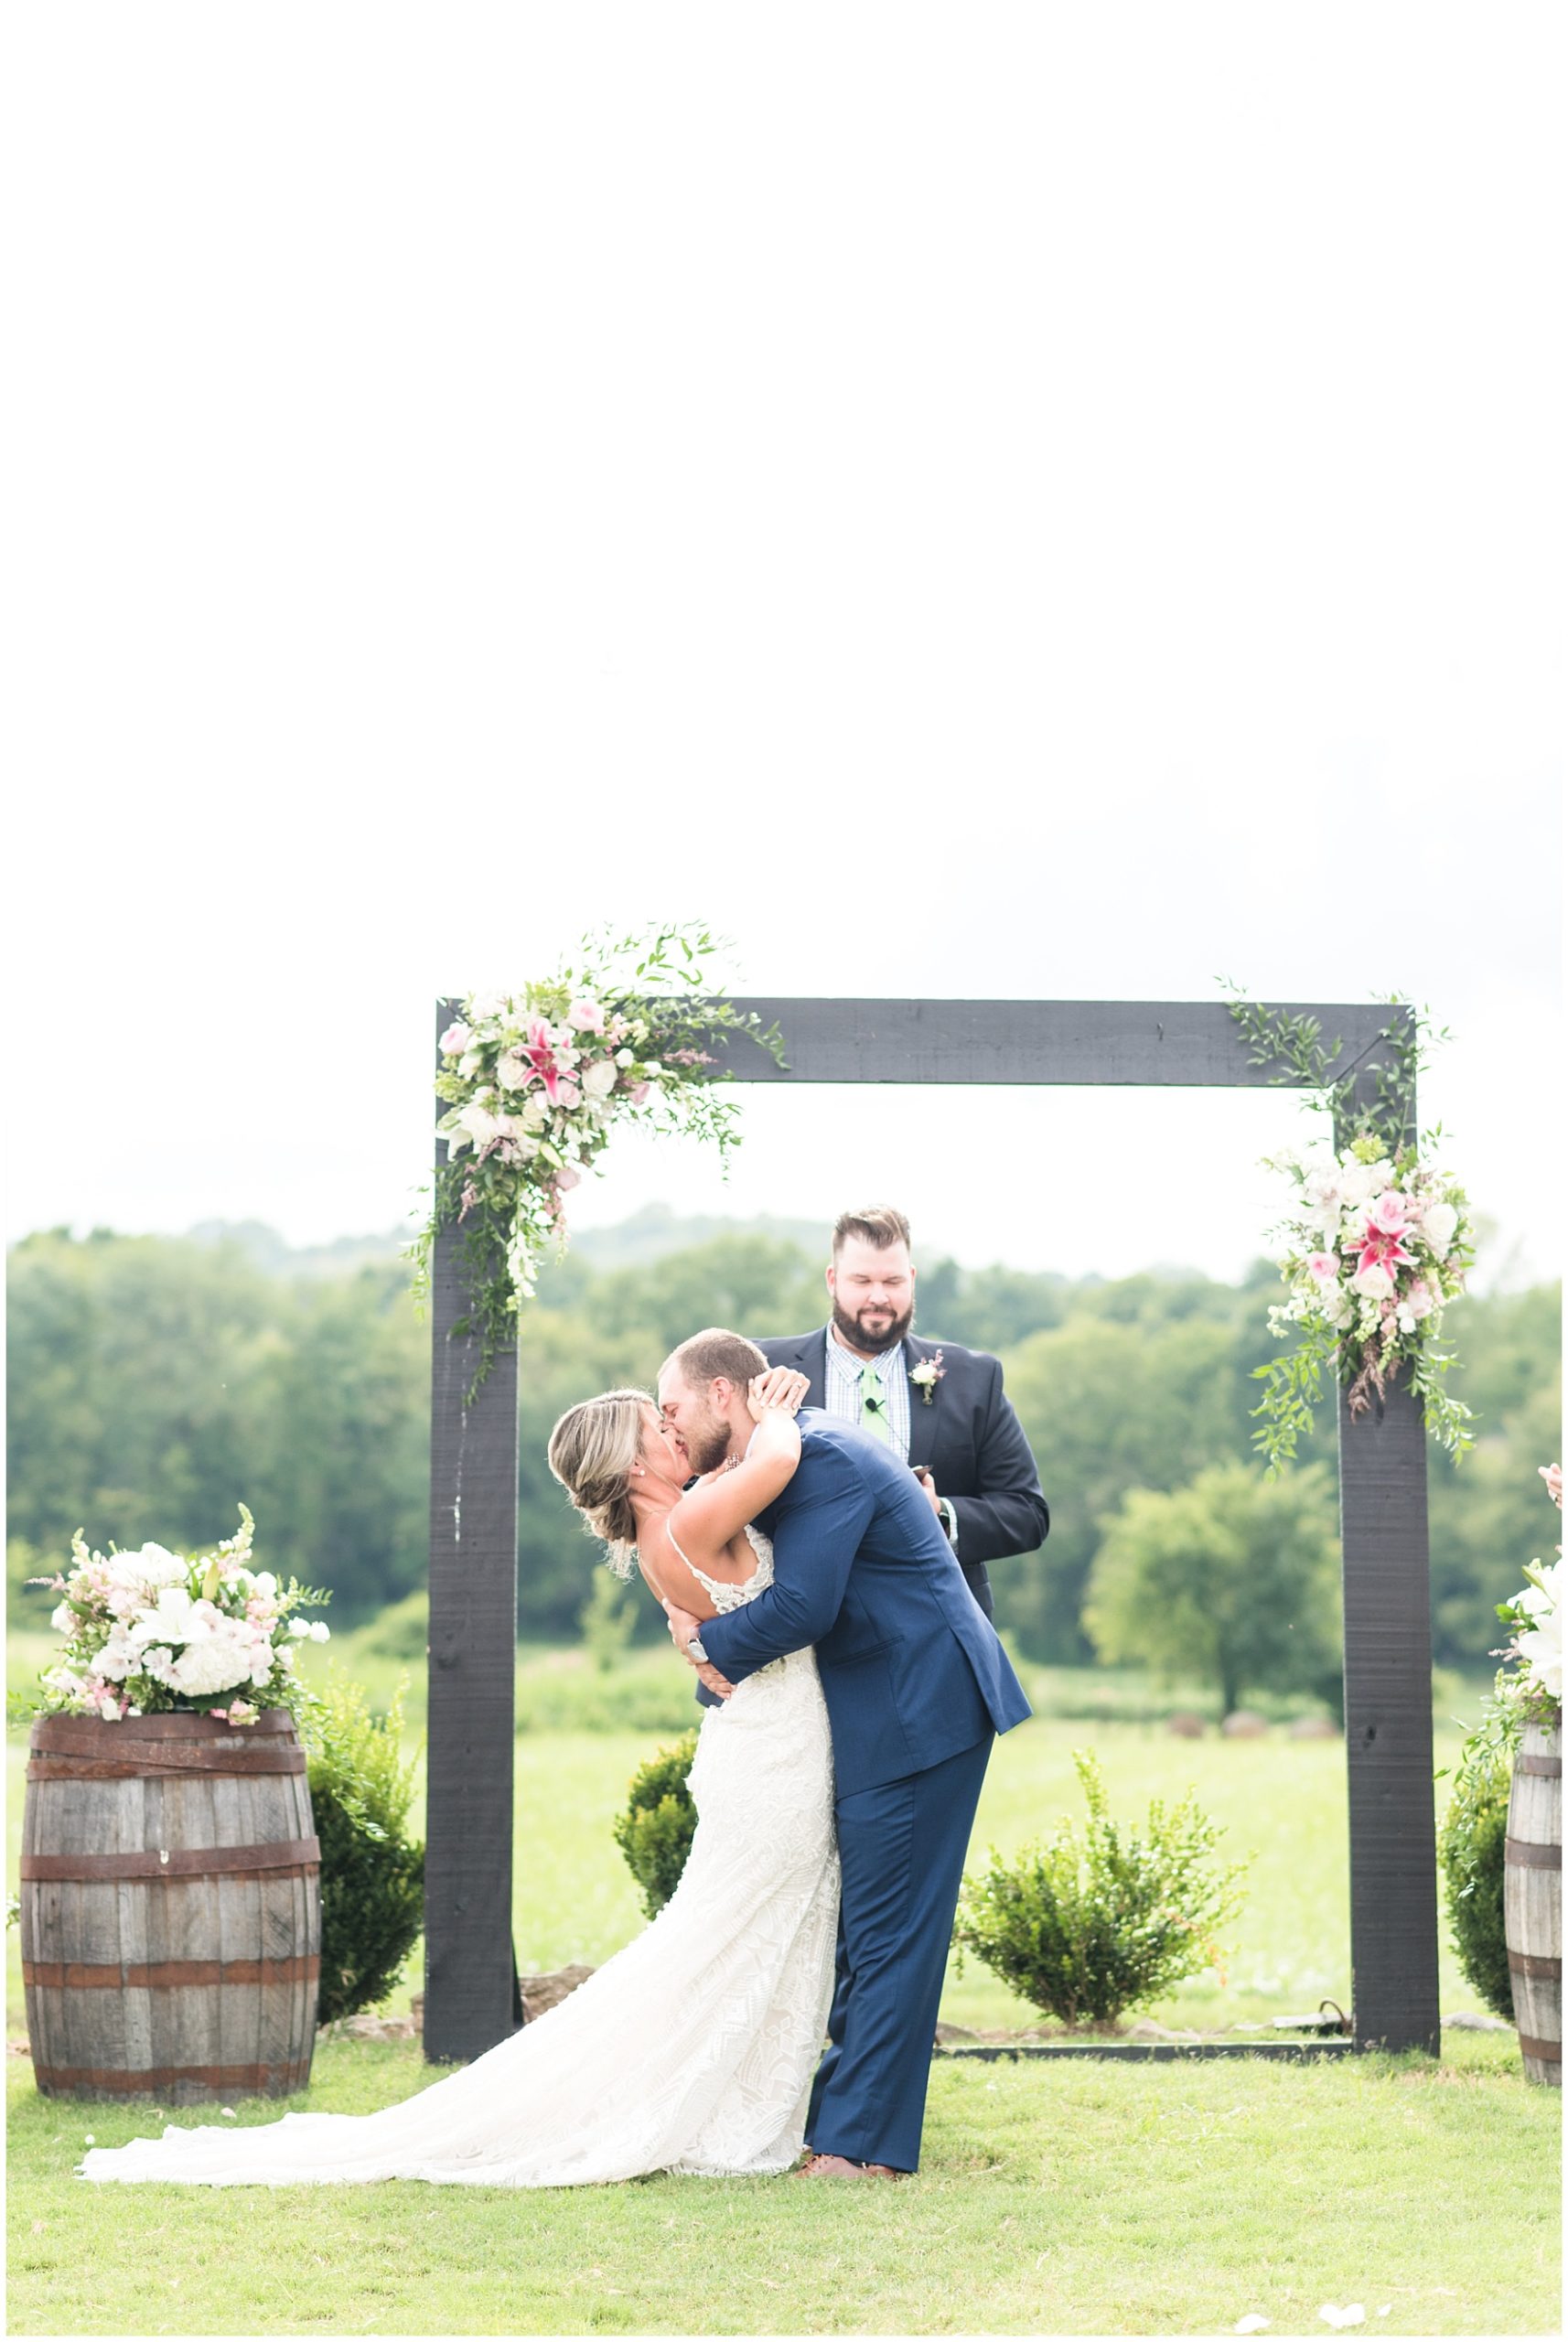 First kiss at wedding at Allenbrooke Farms in Spring Hill